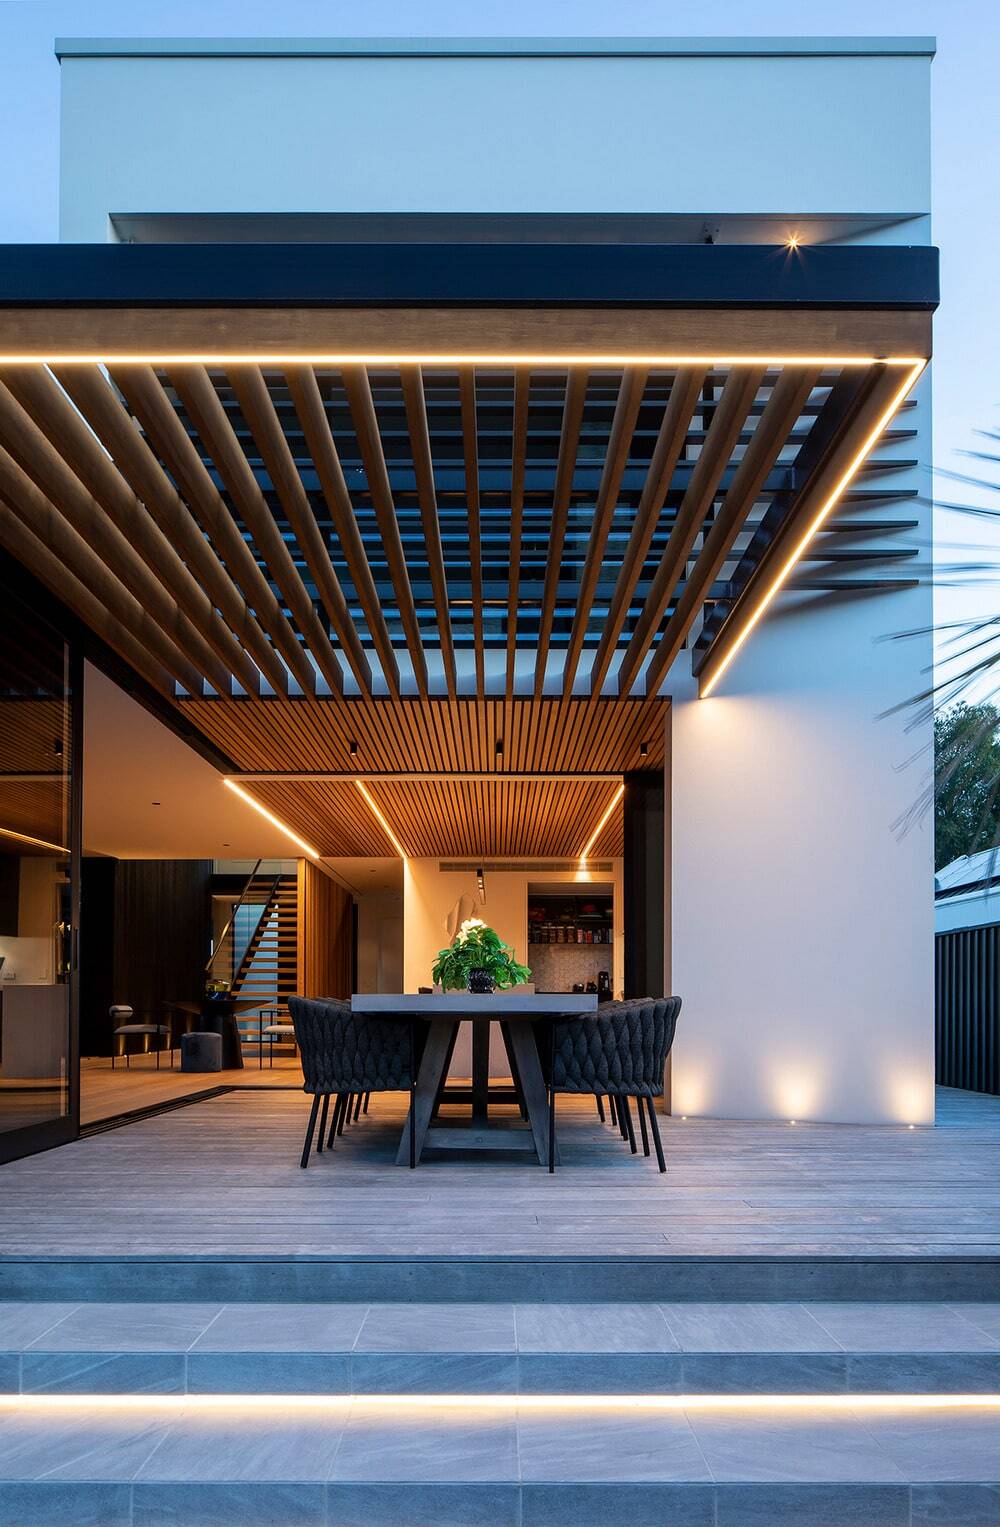 Desmond Street House by Arthouse Architects